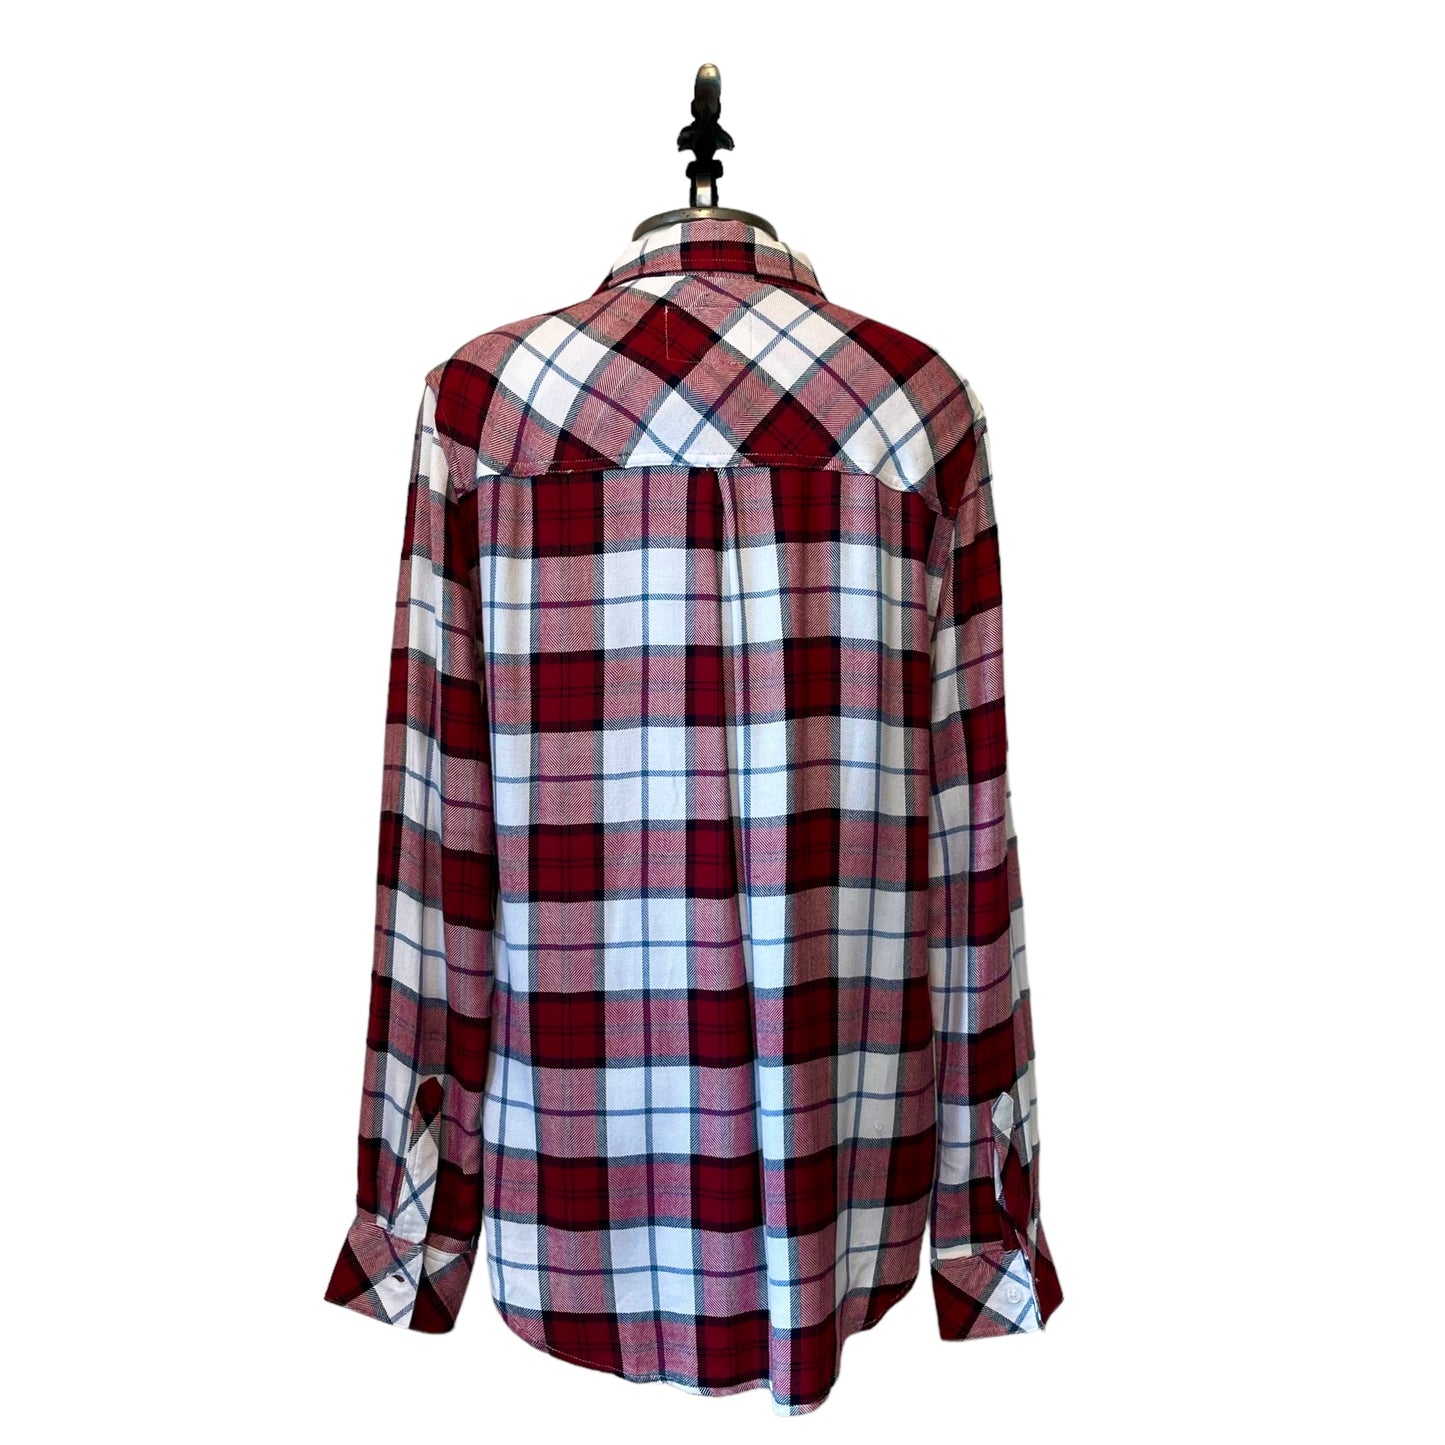 Rails Blouse - Small - New